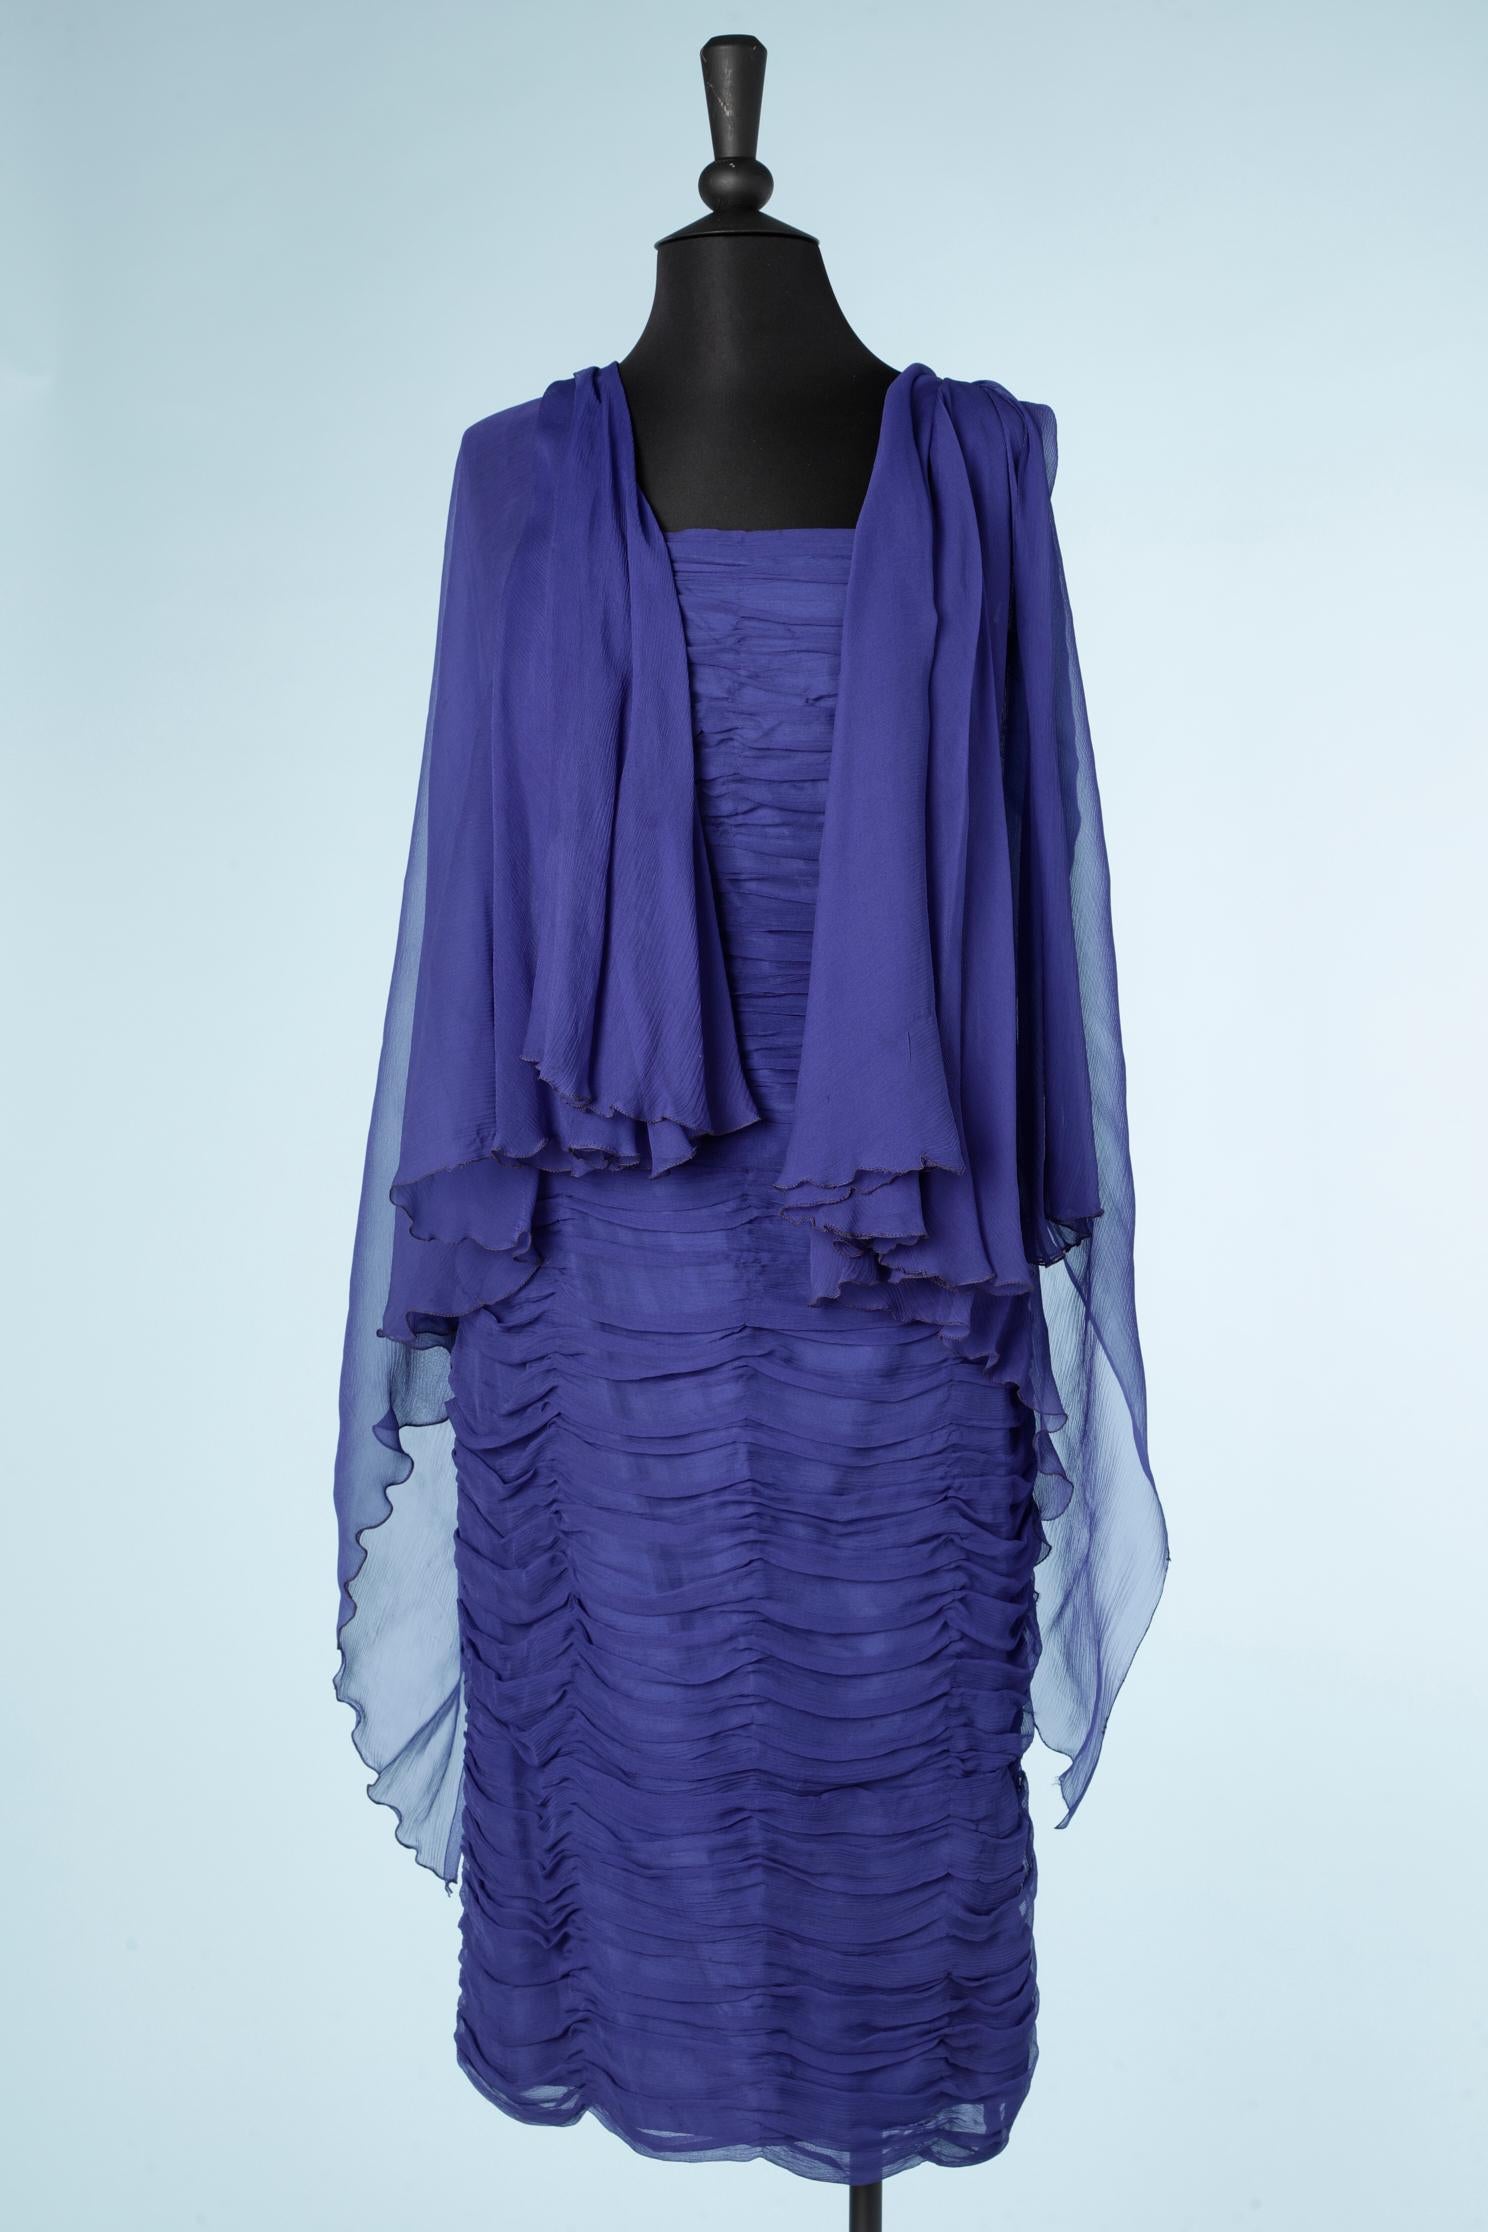 Blue chiffon draped  bustier cocktail dress with 2 scarves attached in the back.
SIZE S